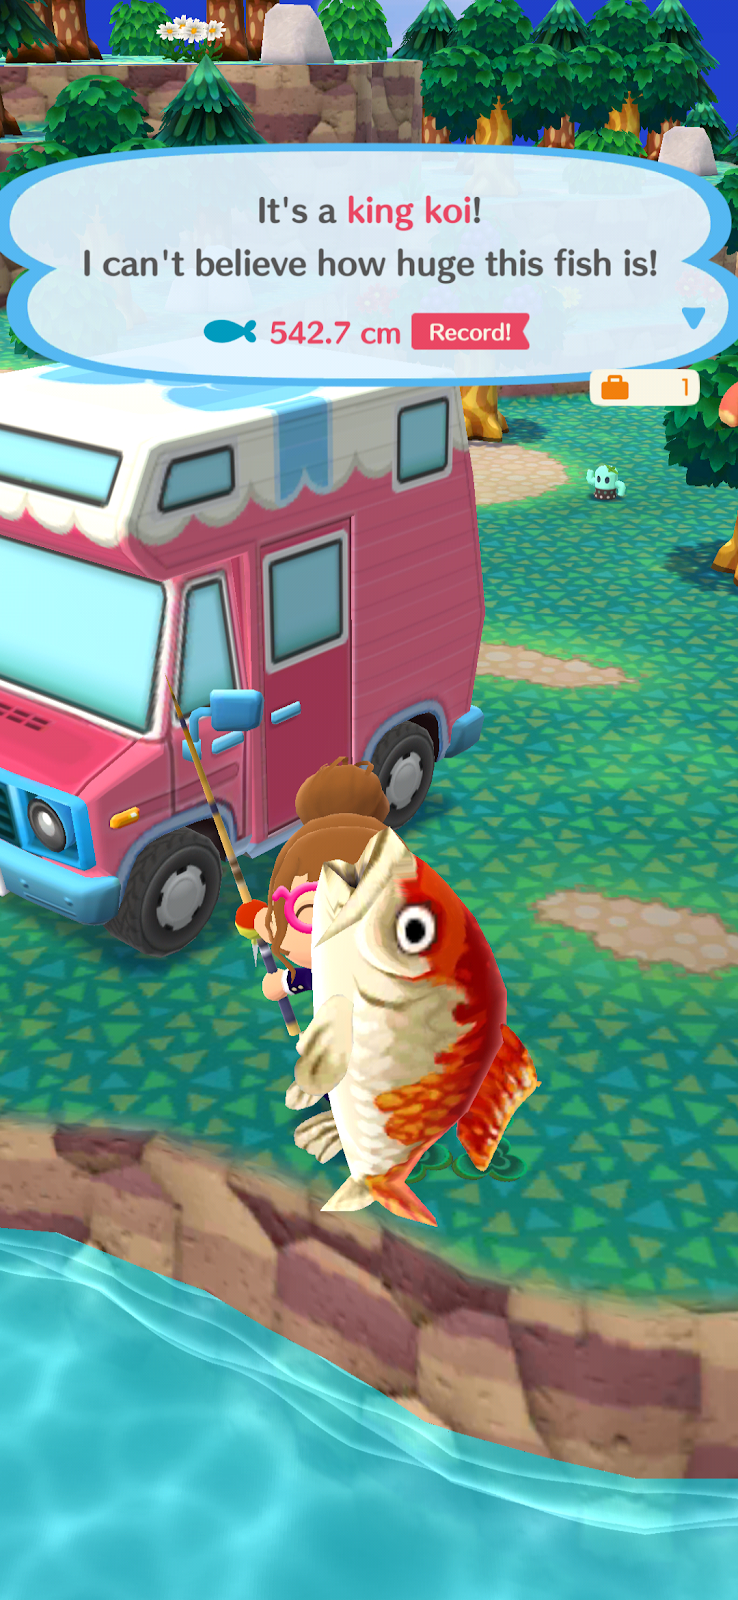 All About Rare Animals Unique Animals And More Rarest Fish To Catch In Animal Crossing New Leaf